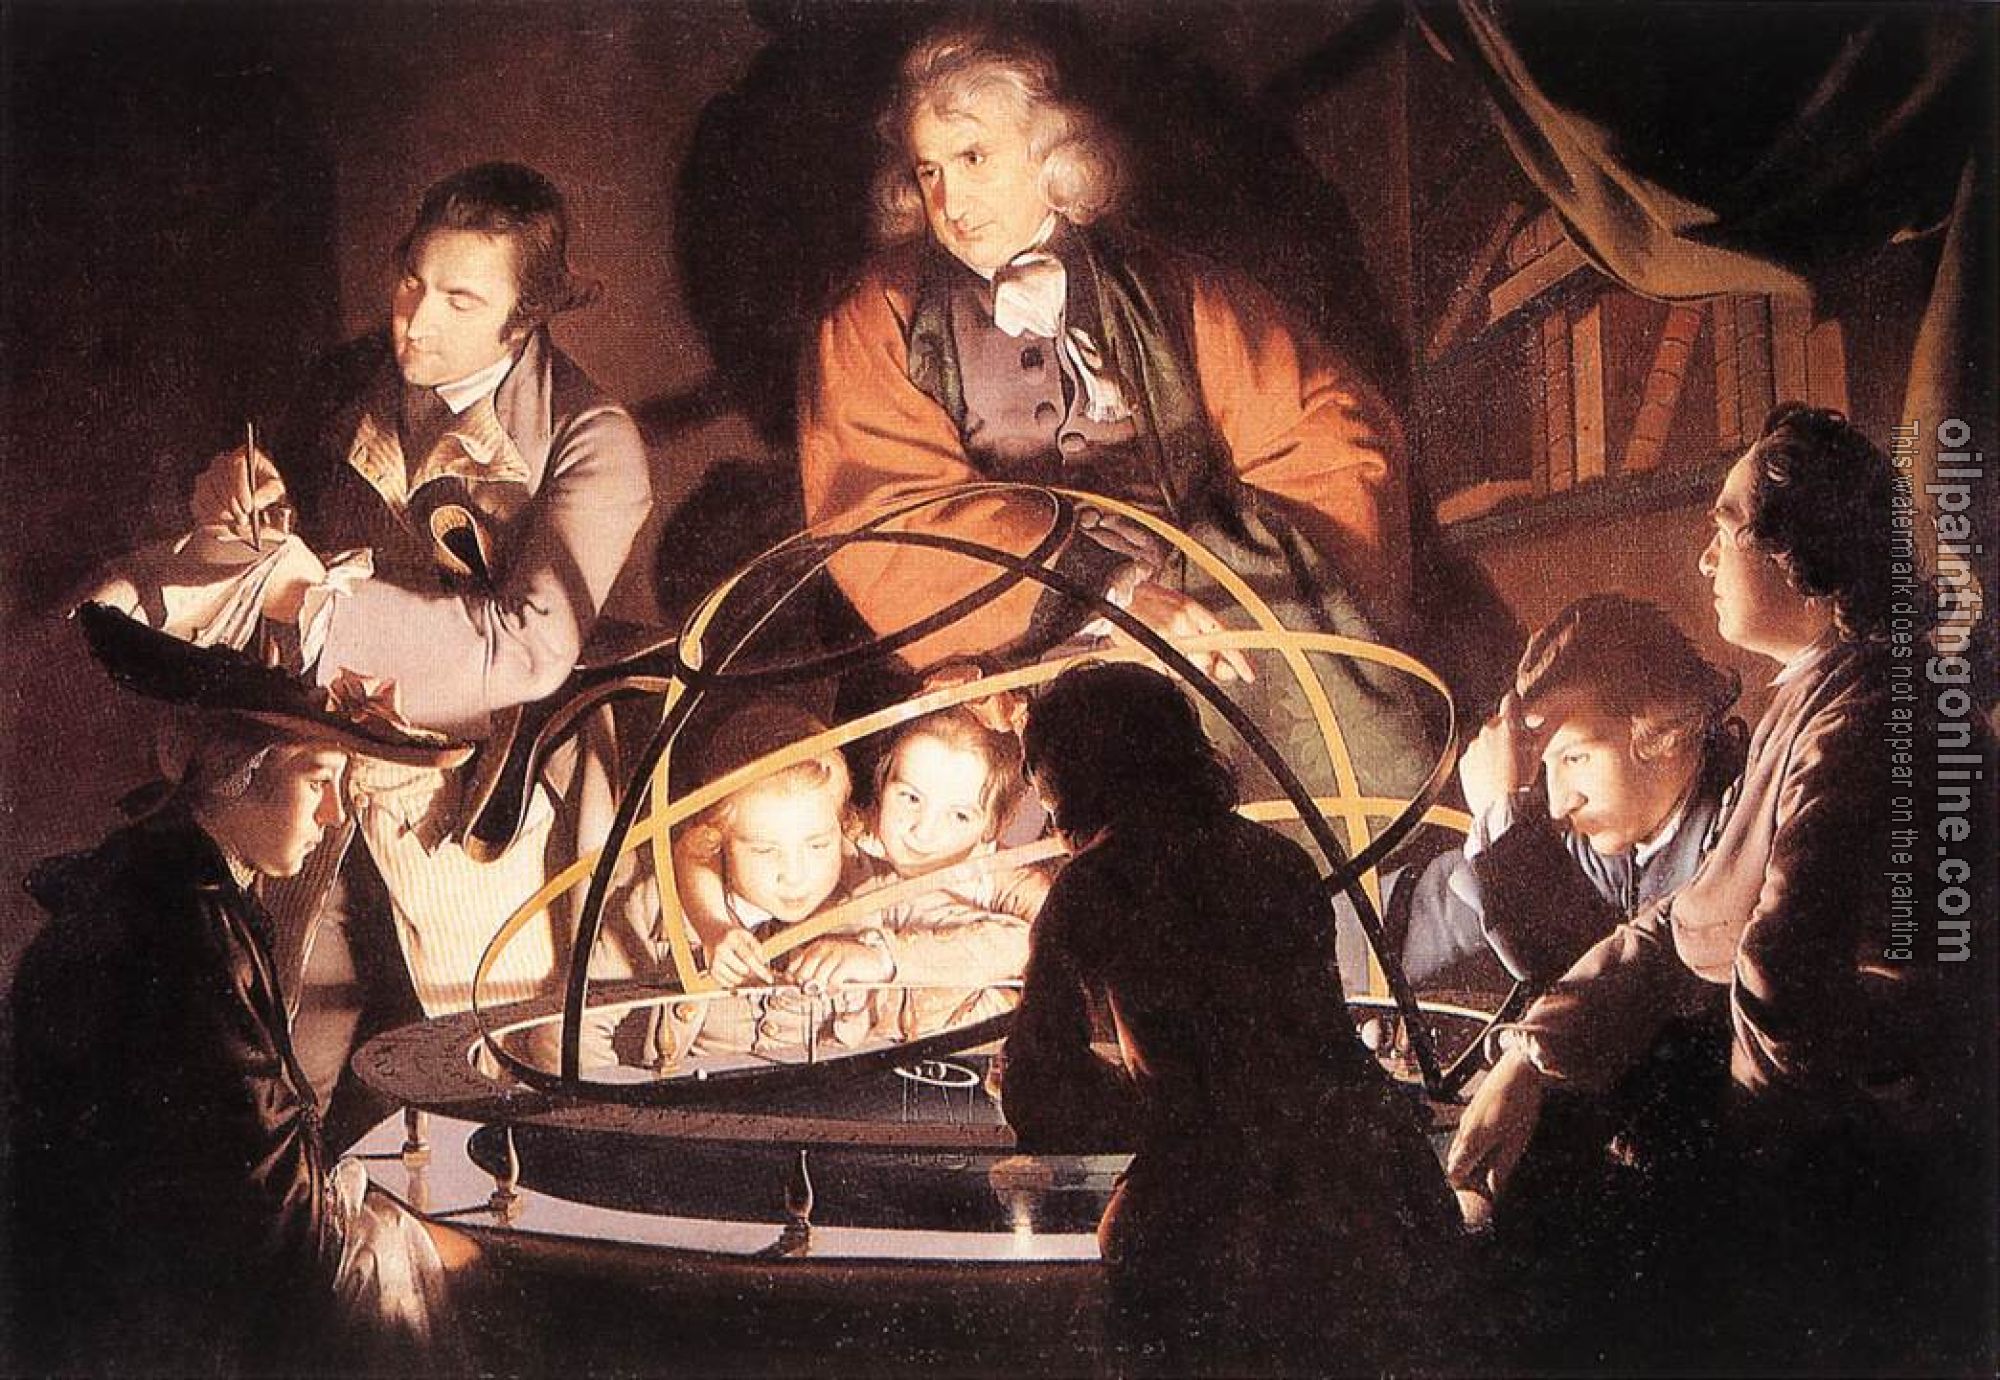 Joseph Wright of Derby - A Philosopher Lecturing with a Mechanical Planetary